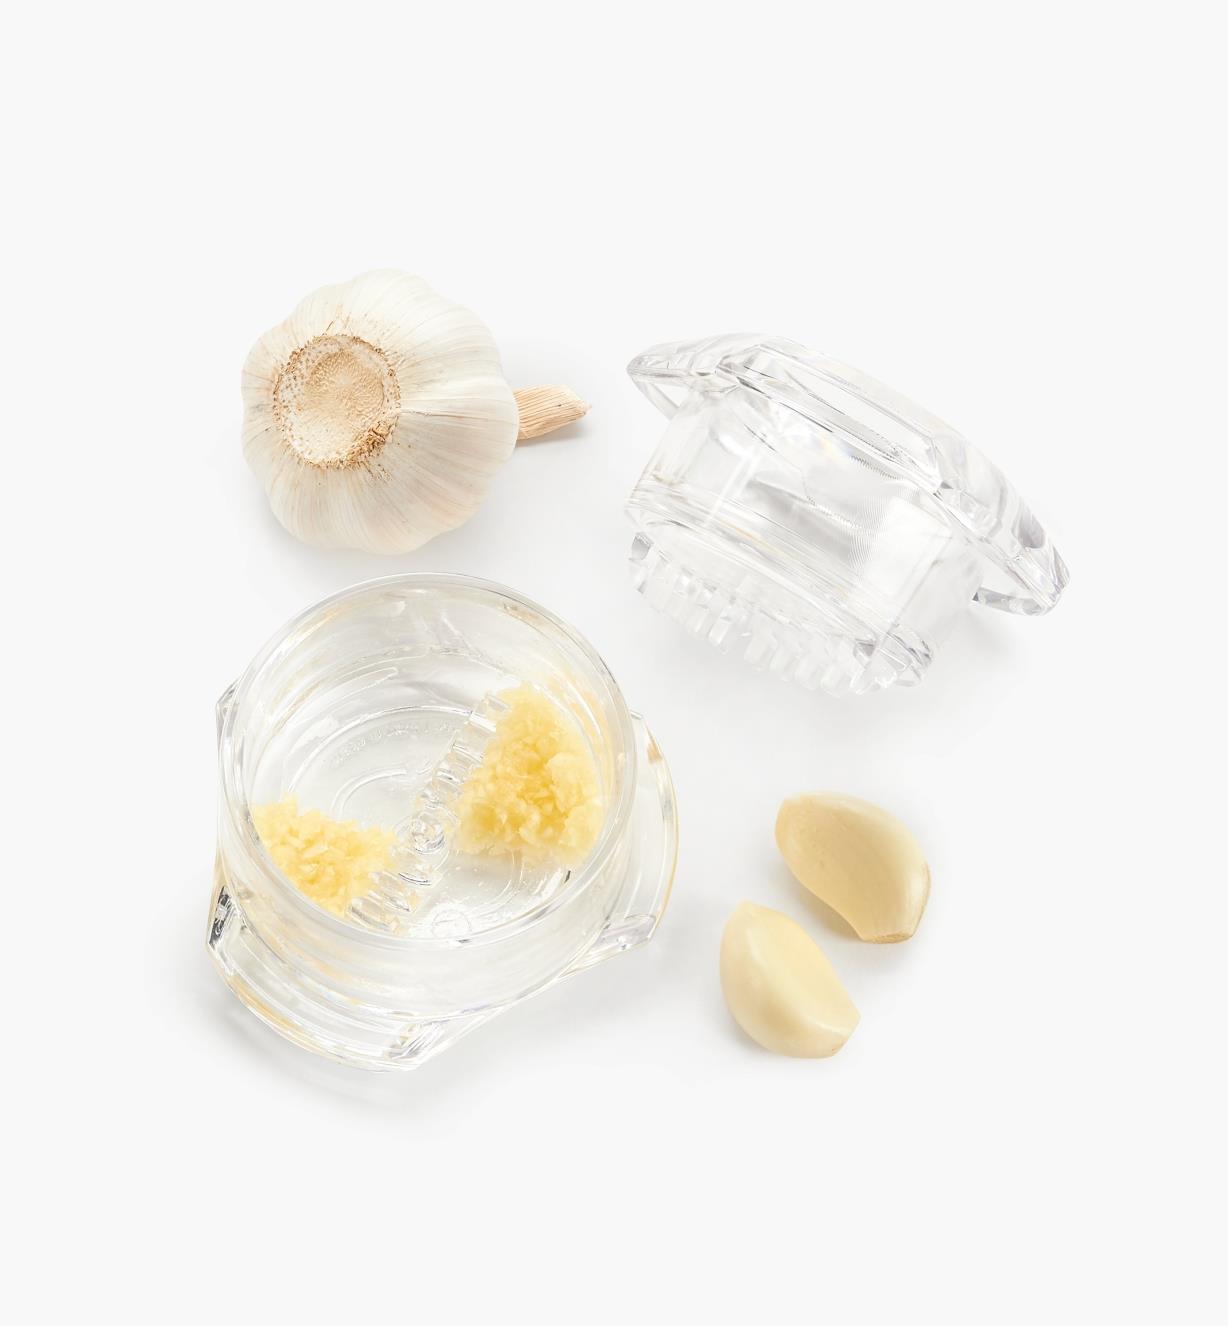 Garlic Mincer with minced garlic inside, with garlic cloves and a whole garlic lying next to it